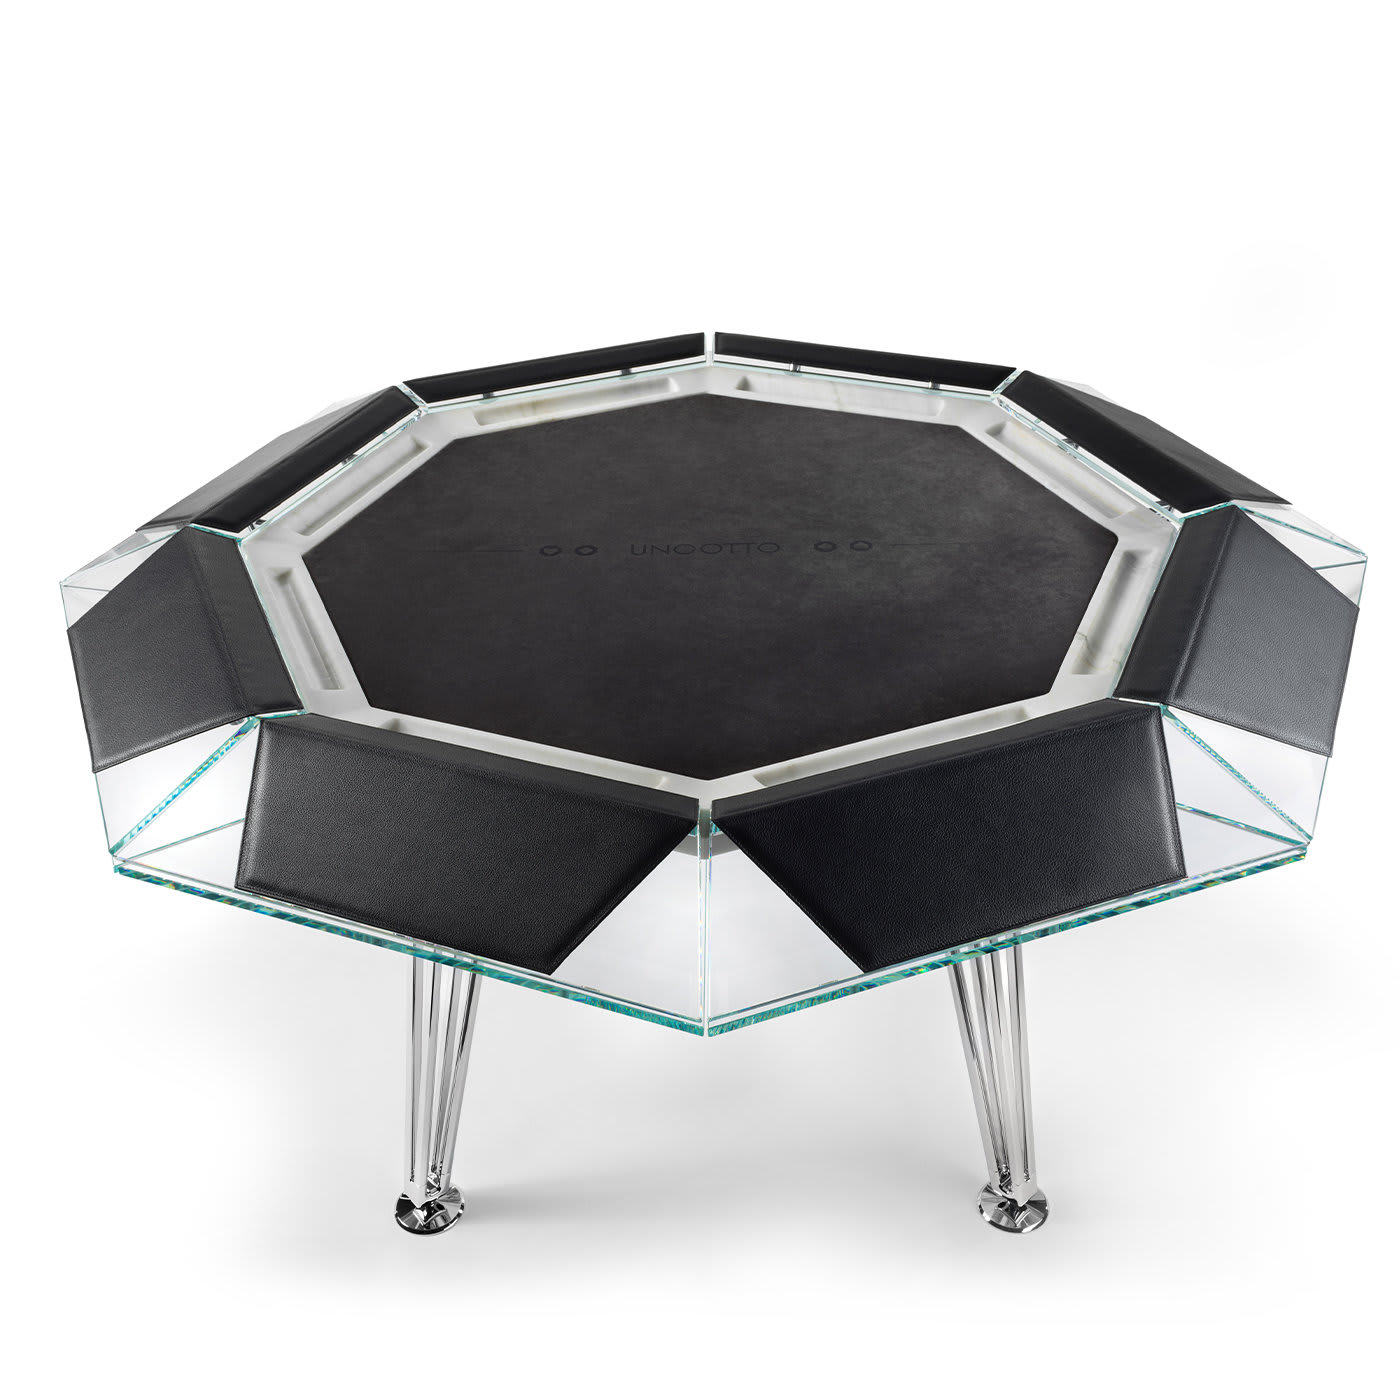 Unootto 8 Player Marble Edition Poker Table - Impatia